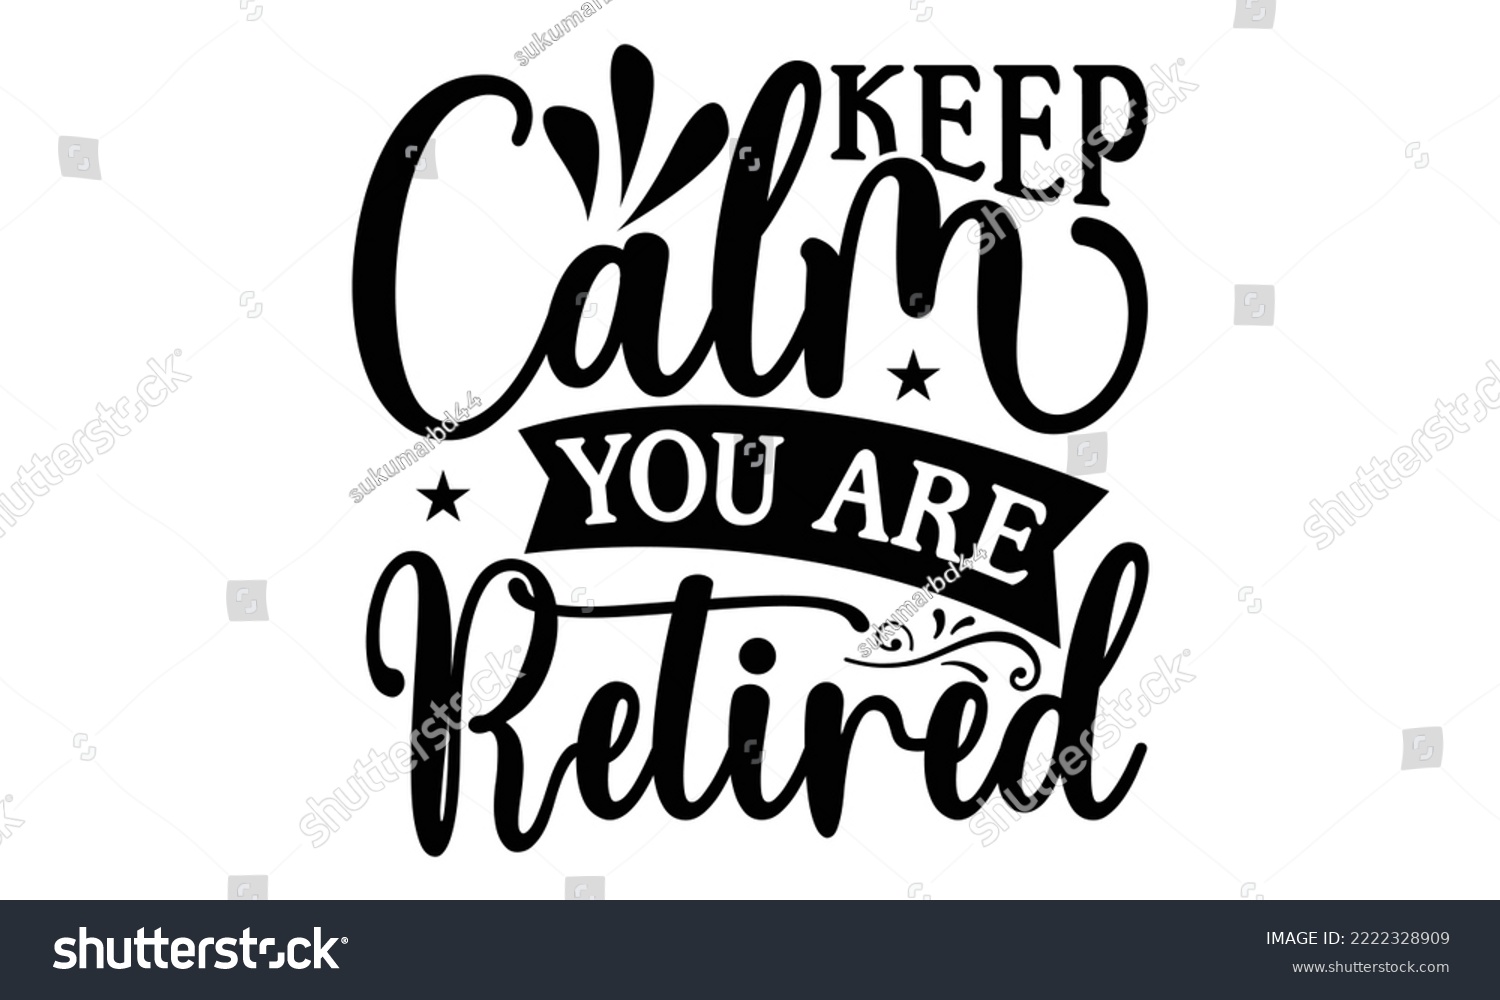 SVG of Keep Calm You Are Retired - Retirement SVG Design, Hand drawn lettering phrase isolated on white background, typography t shirt design, eps, Files for Cutting svg